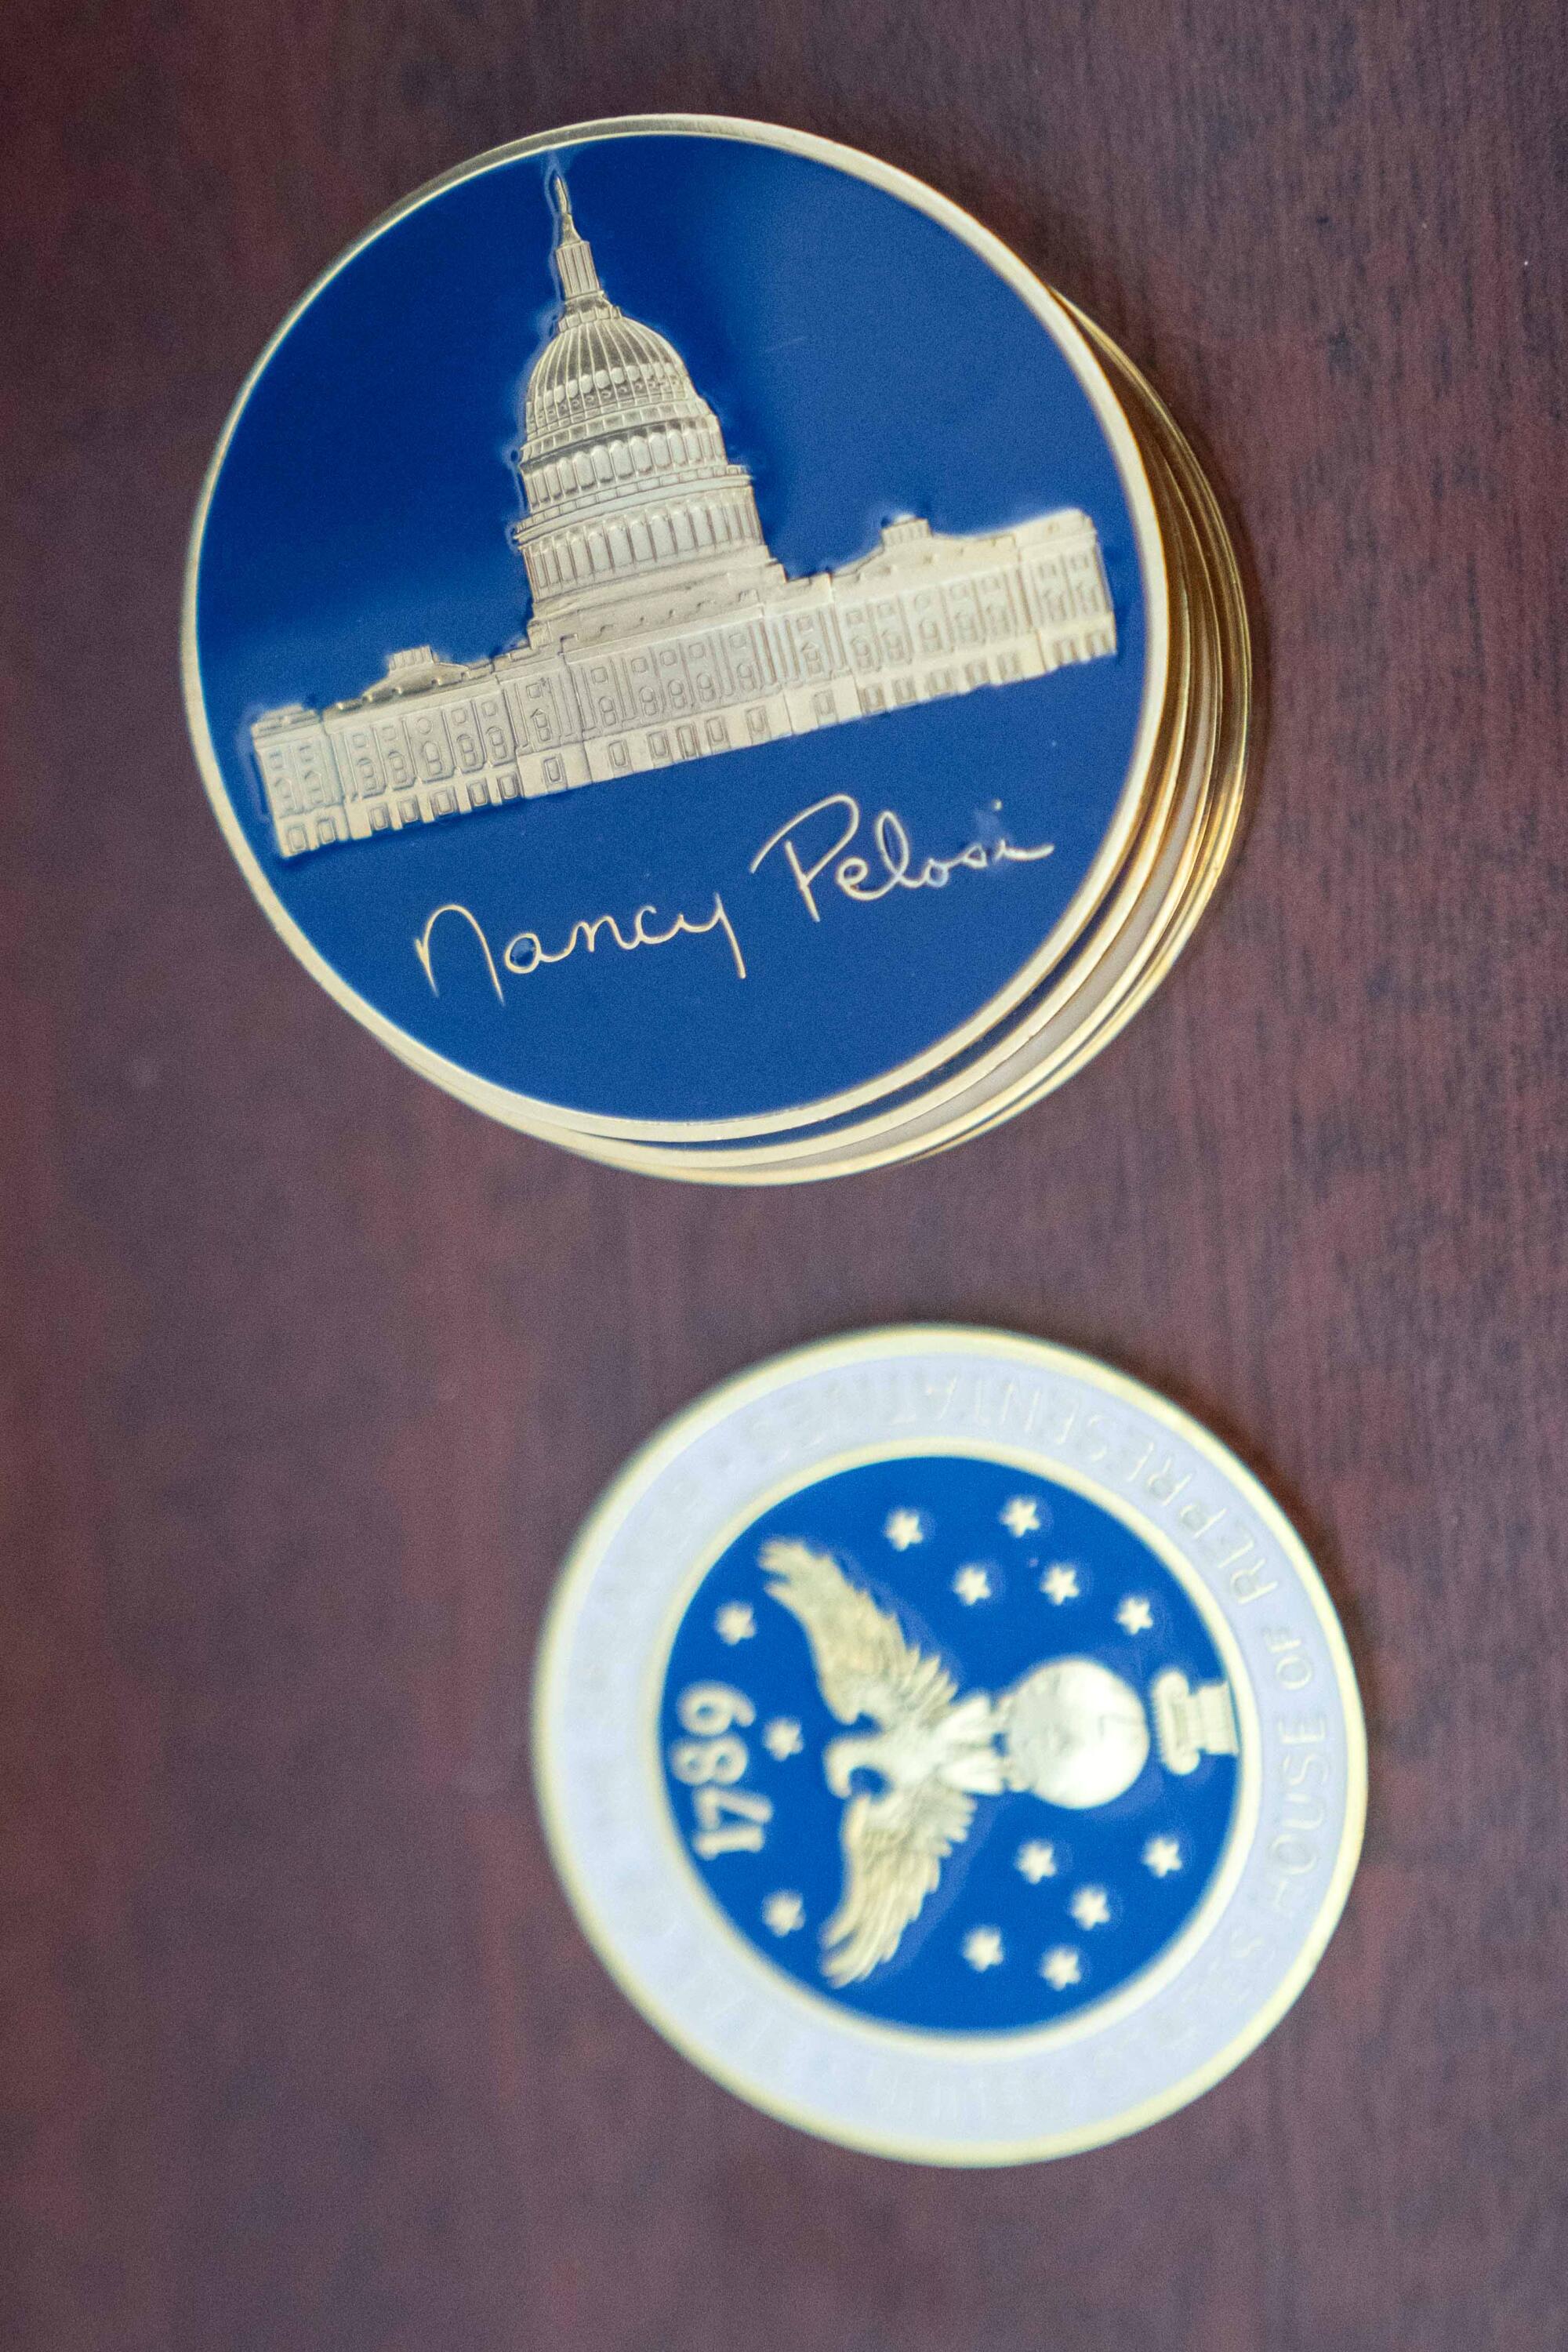 Challenge coins with Nancy Pelosi's signature displayed on a desk in her office in the Capitol.